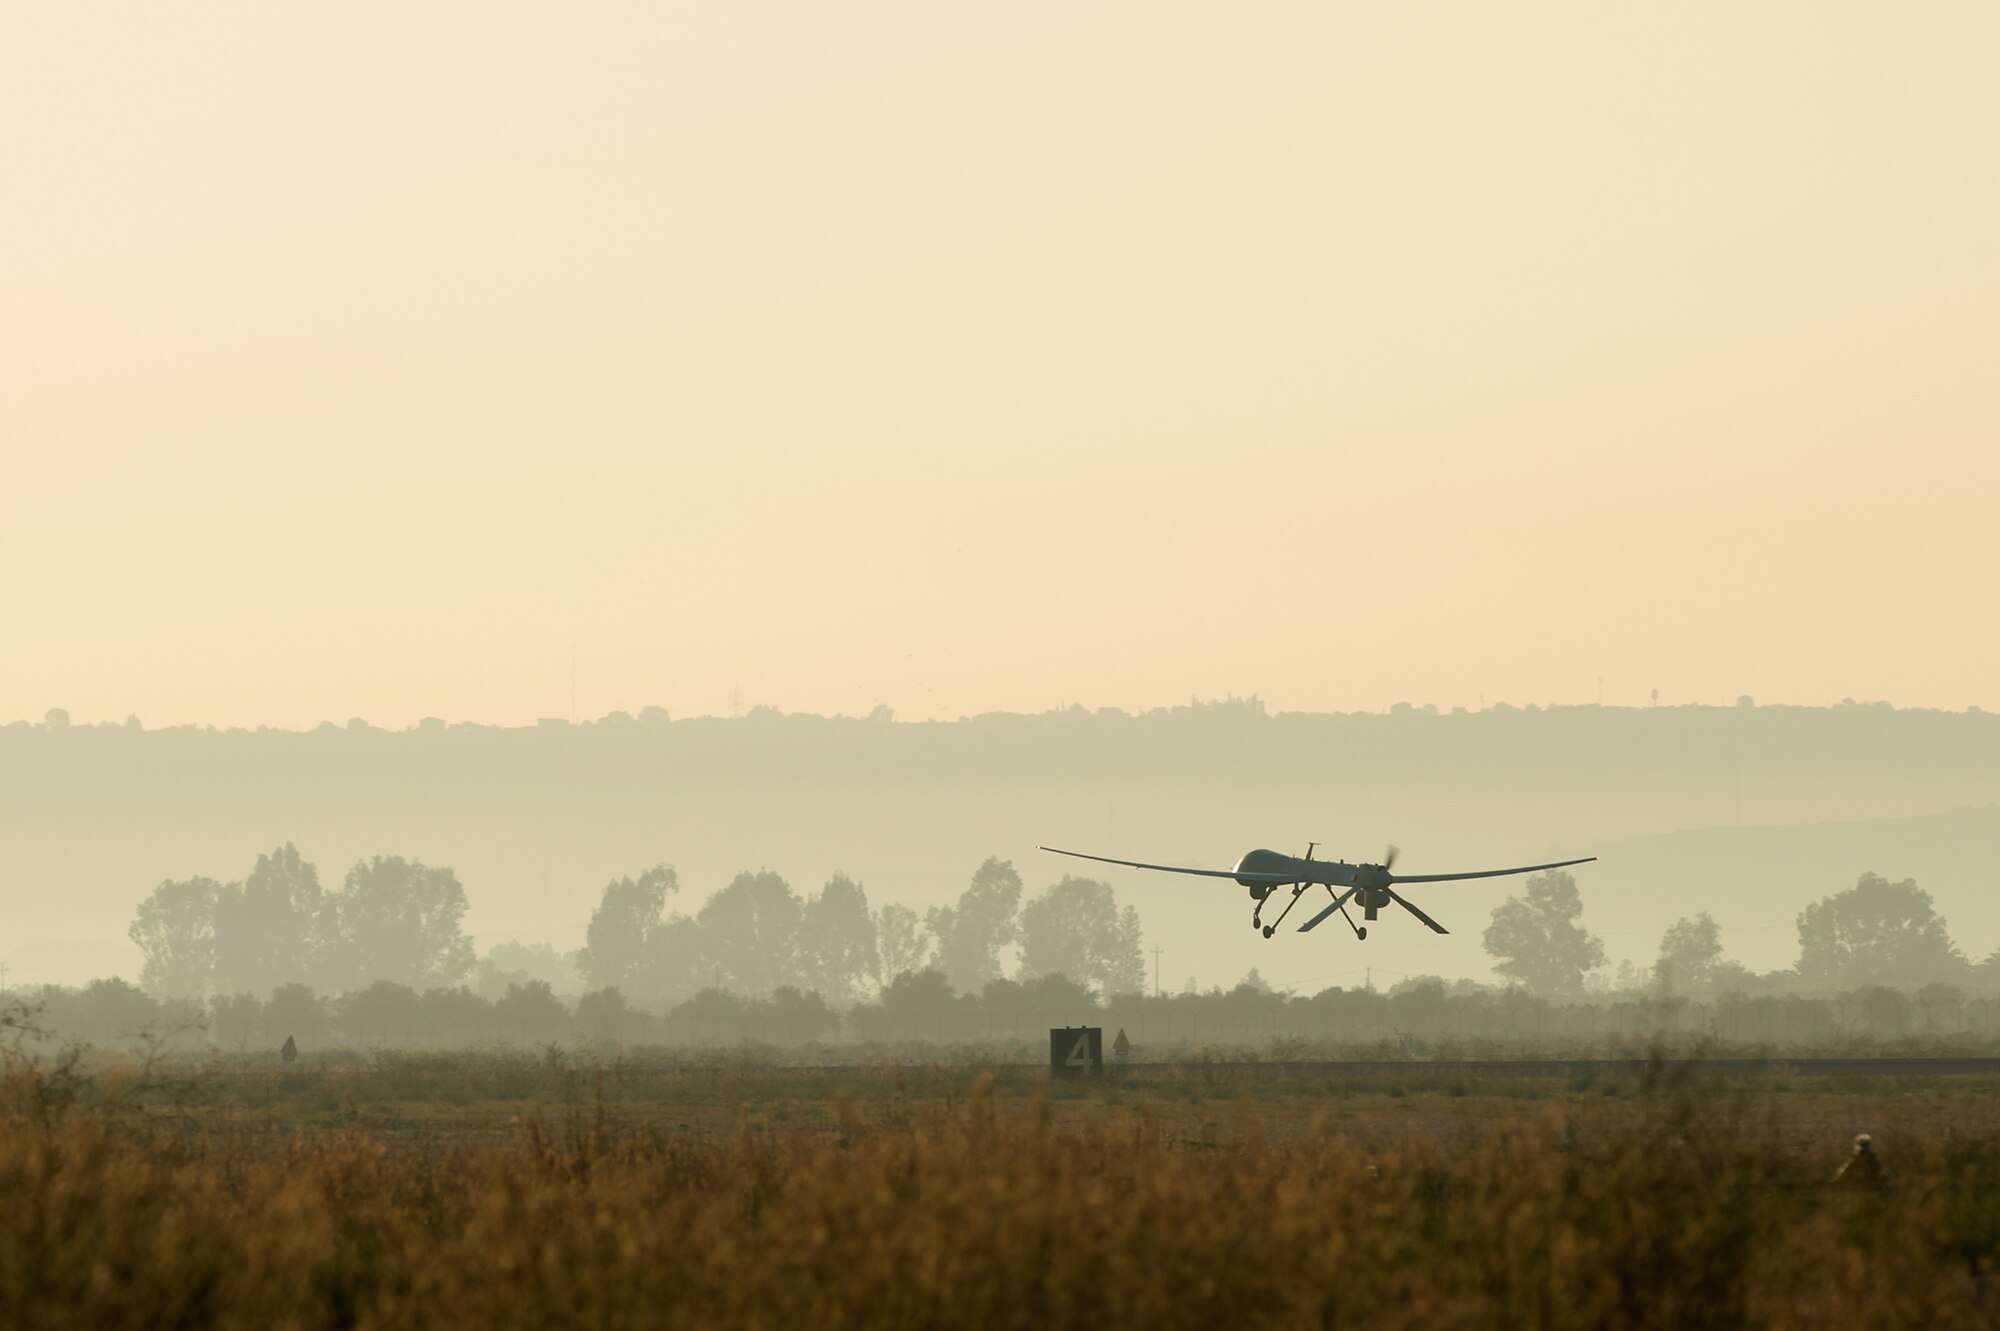 An MQ-1 Predator unmanned aerial vehicle attached to the 324th Expeditionary Reconnaissance Squadron takes off Oct. 22, 2013. (U.S. Navy photo/Mass Communication Specialist 2nd Class Brian T. Glunt)